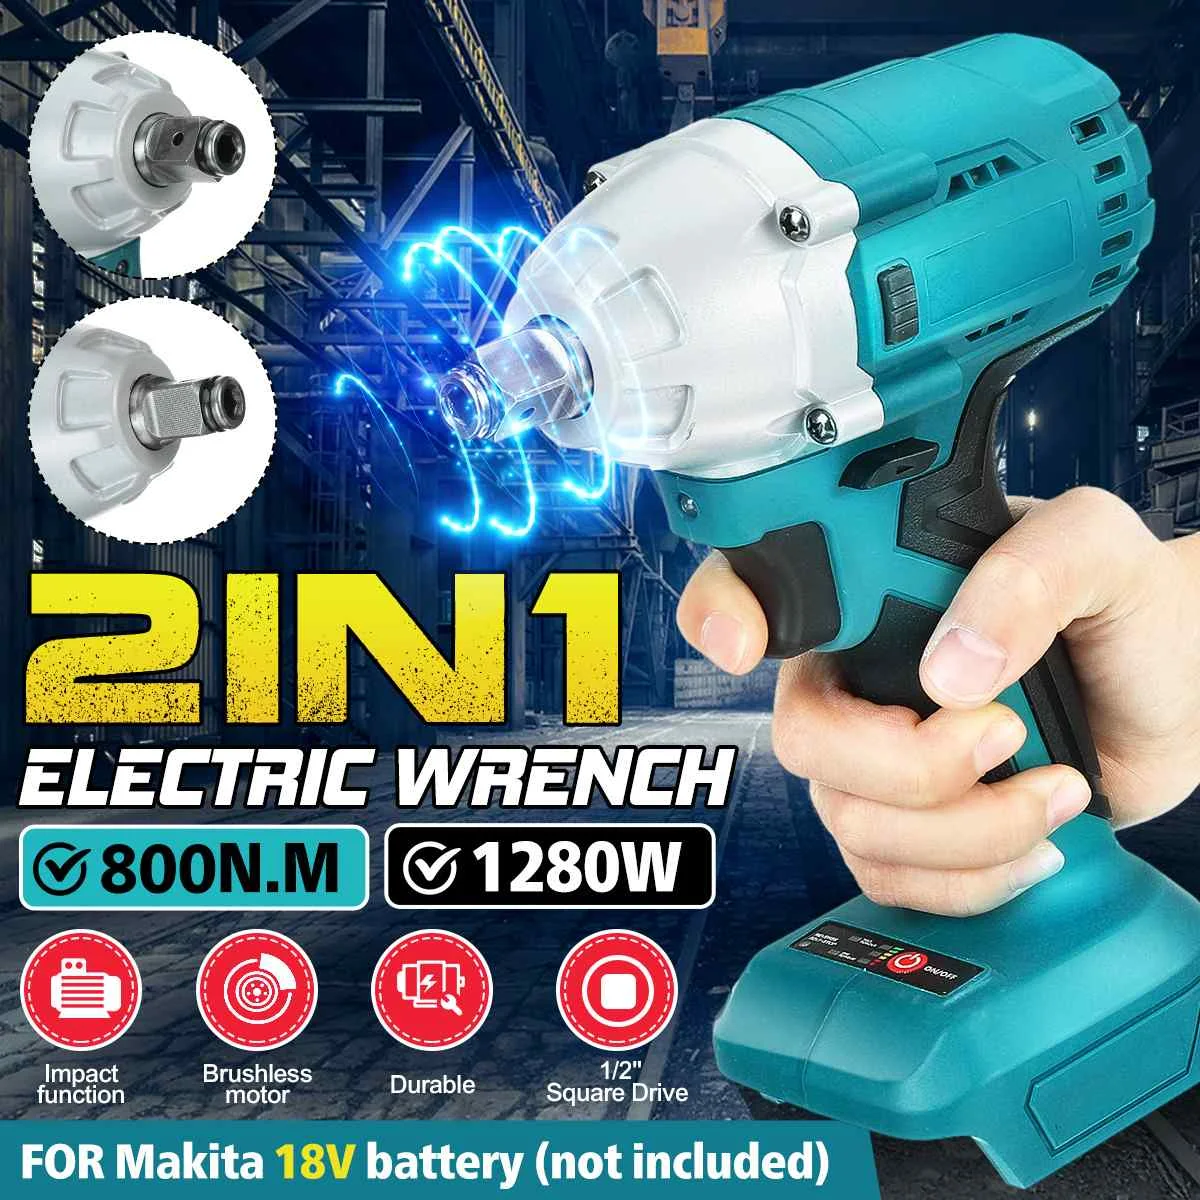 

BLMIATKO Brushless Impact Electric Wrench Screwdriver 800N.m Rechargeable 1/2 Socket Wrench Power Tools For Makita 18V Battery